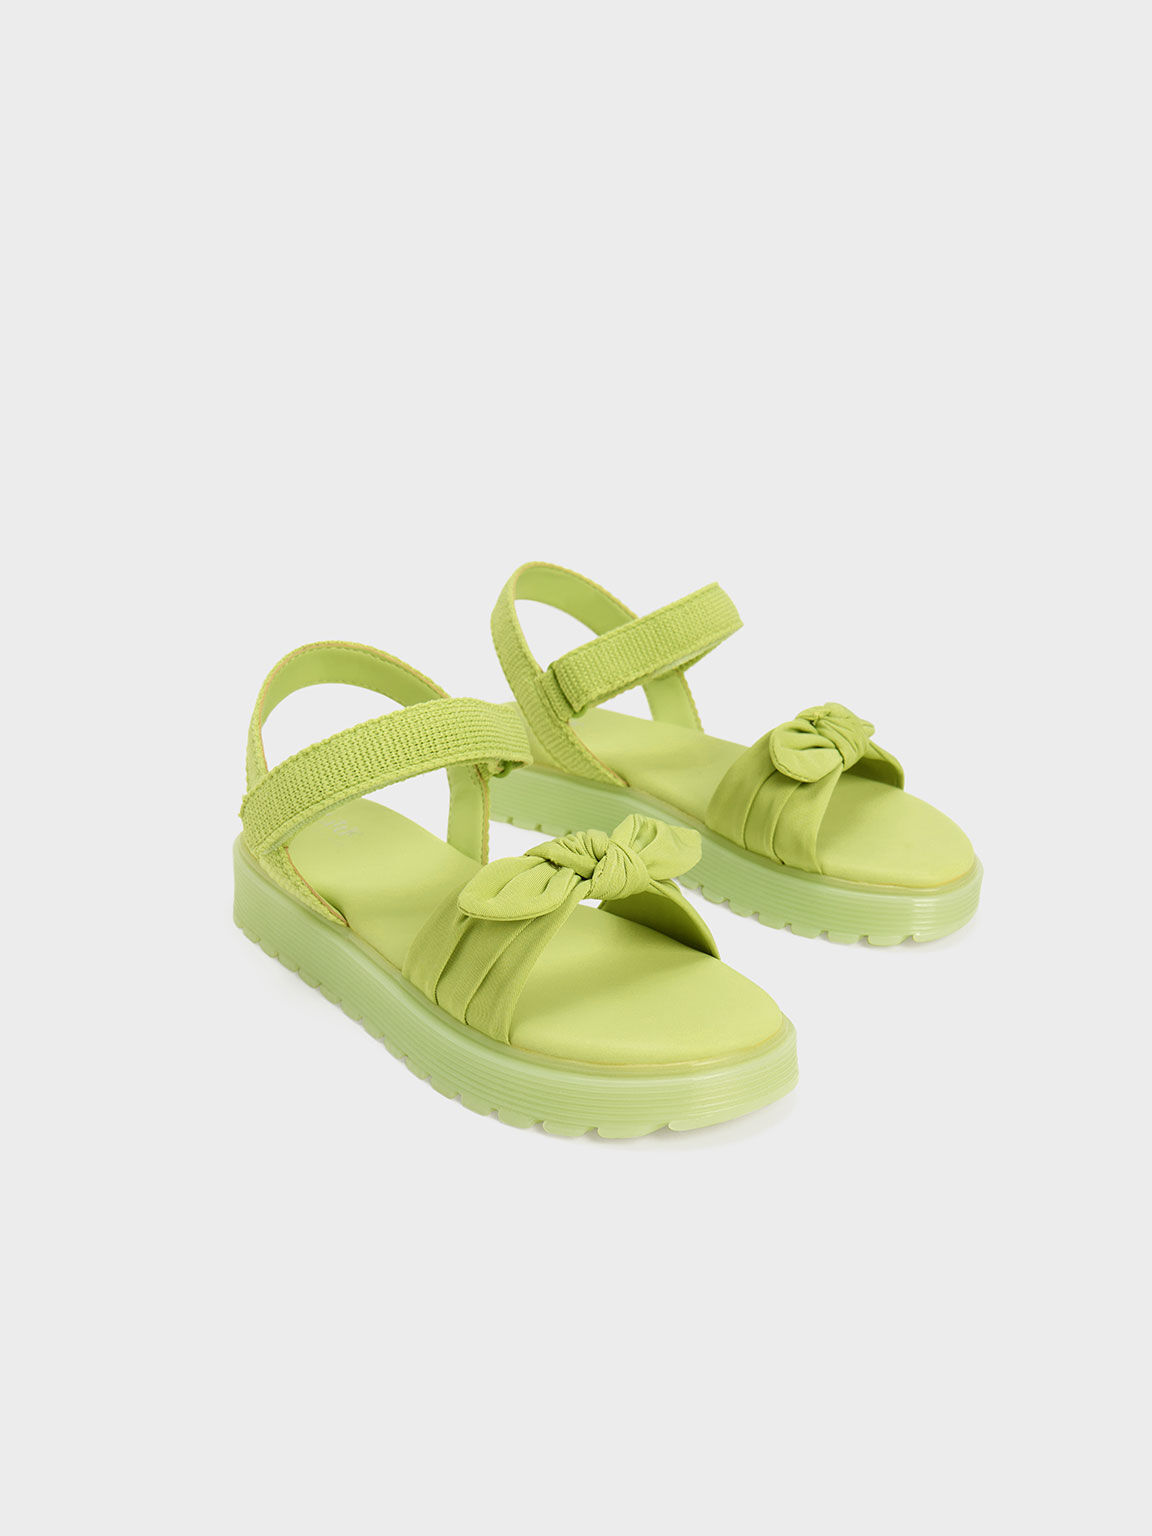 Girls' Nylon Knotted Sandals, Lime, hi-res